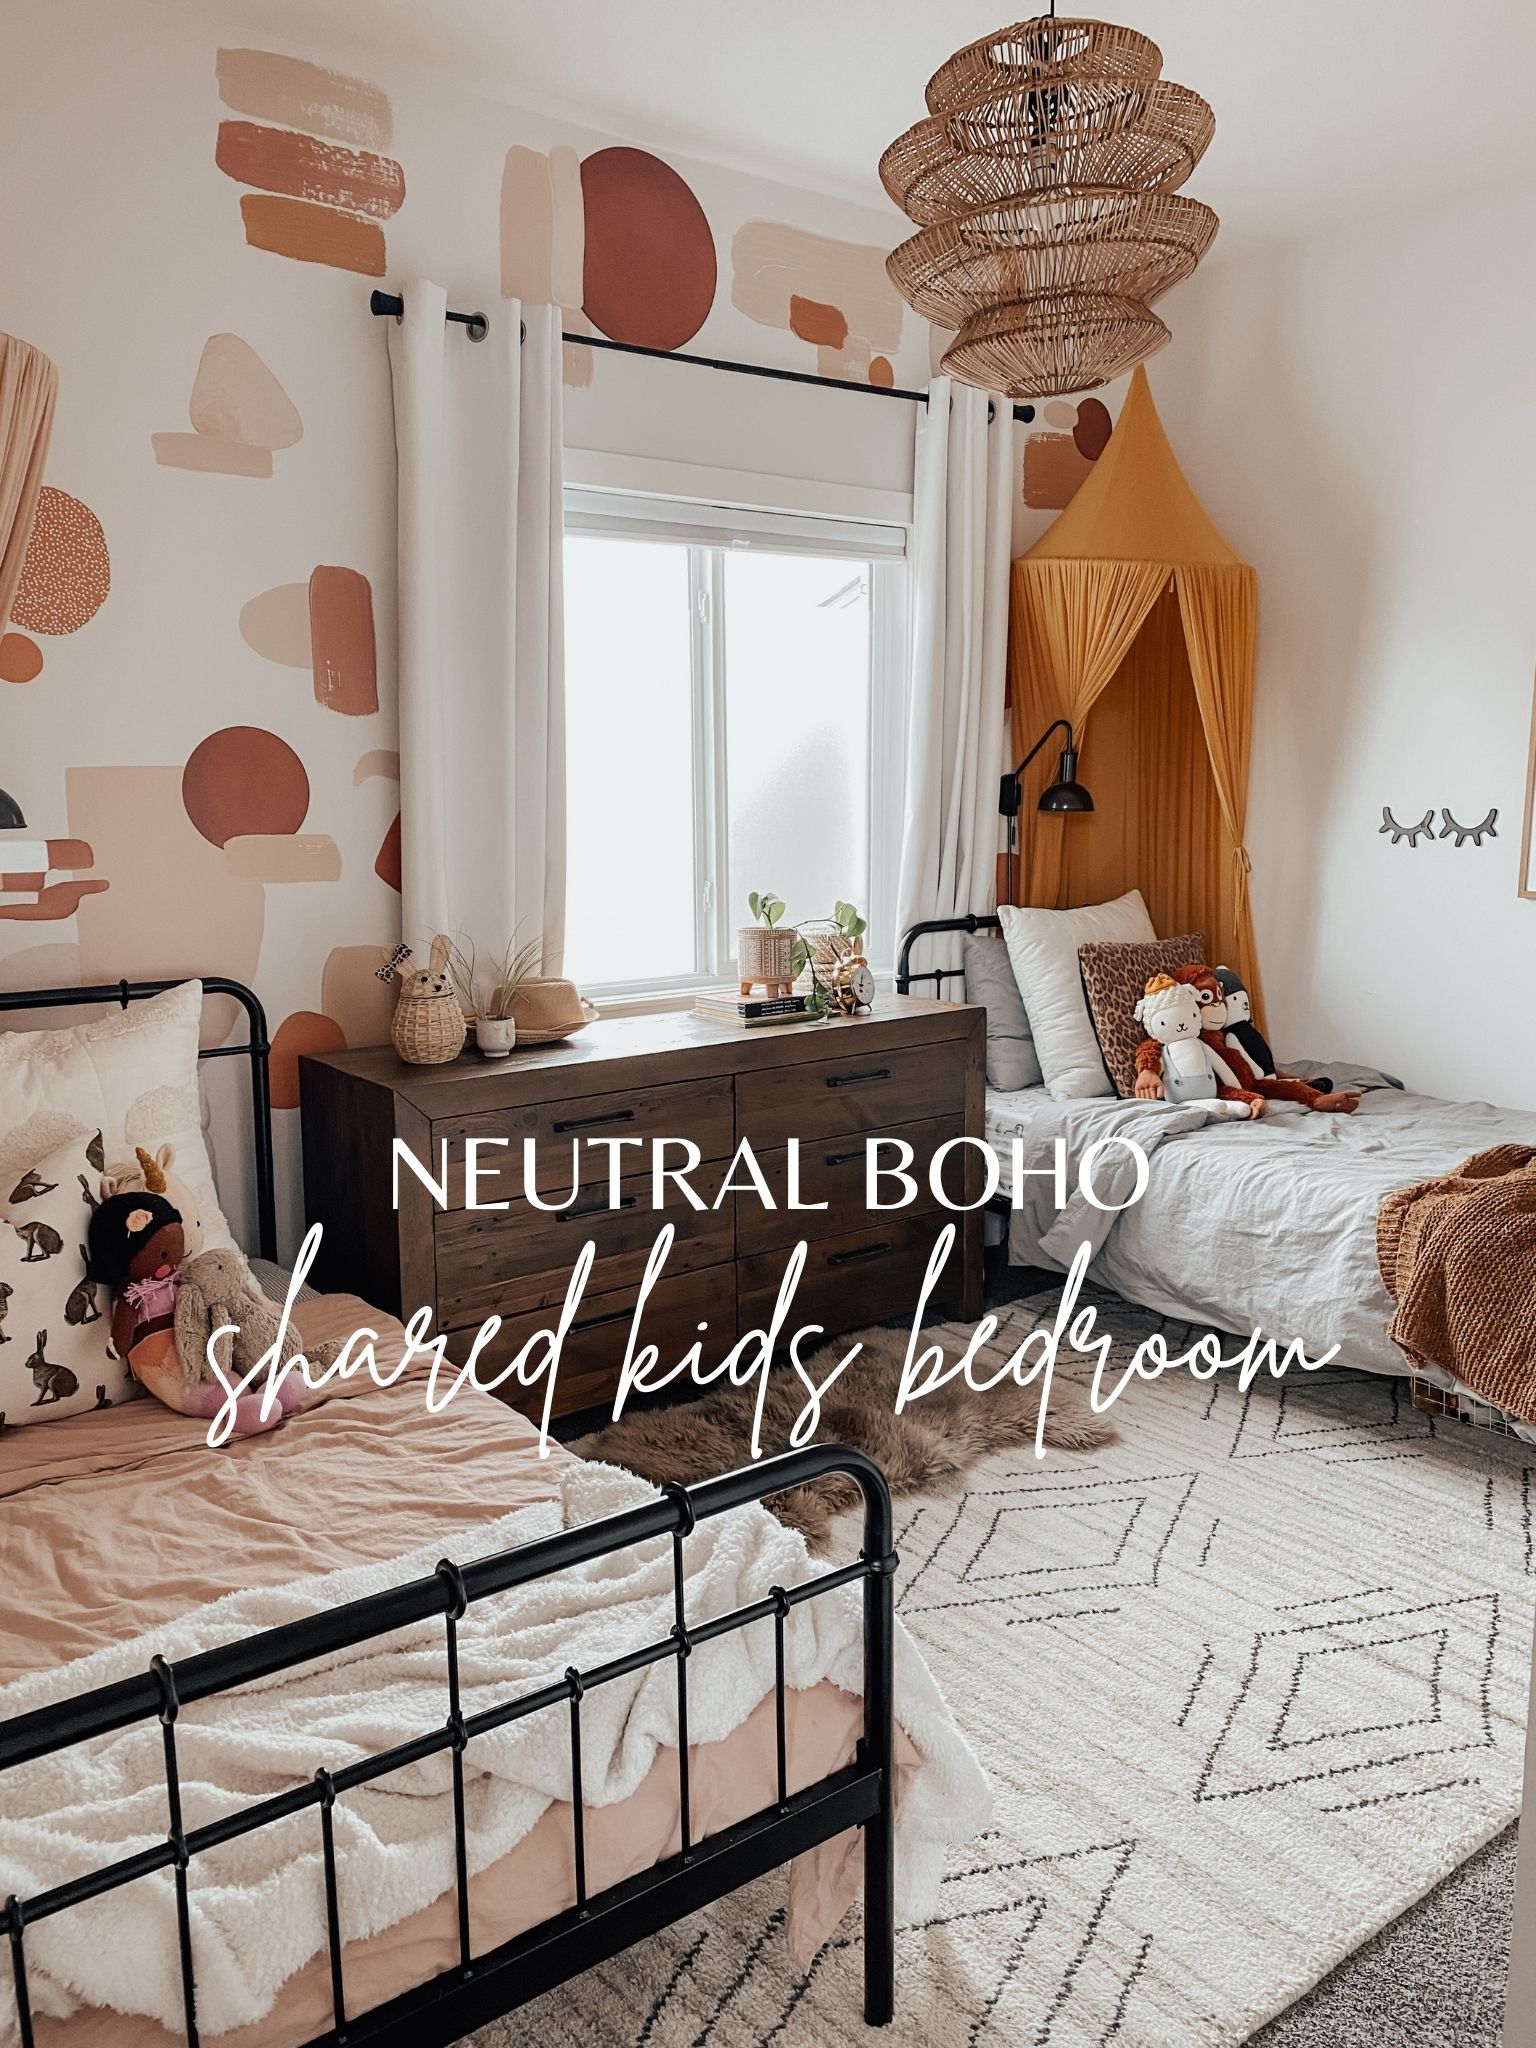 Boho Kids Room Decor: The Latest Trend and How to Embrace It